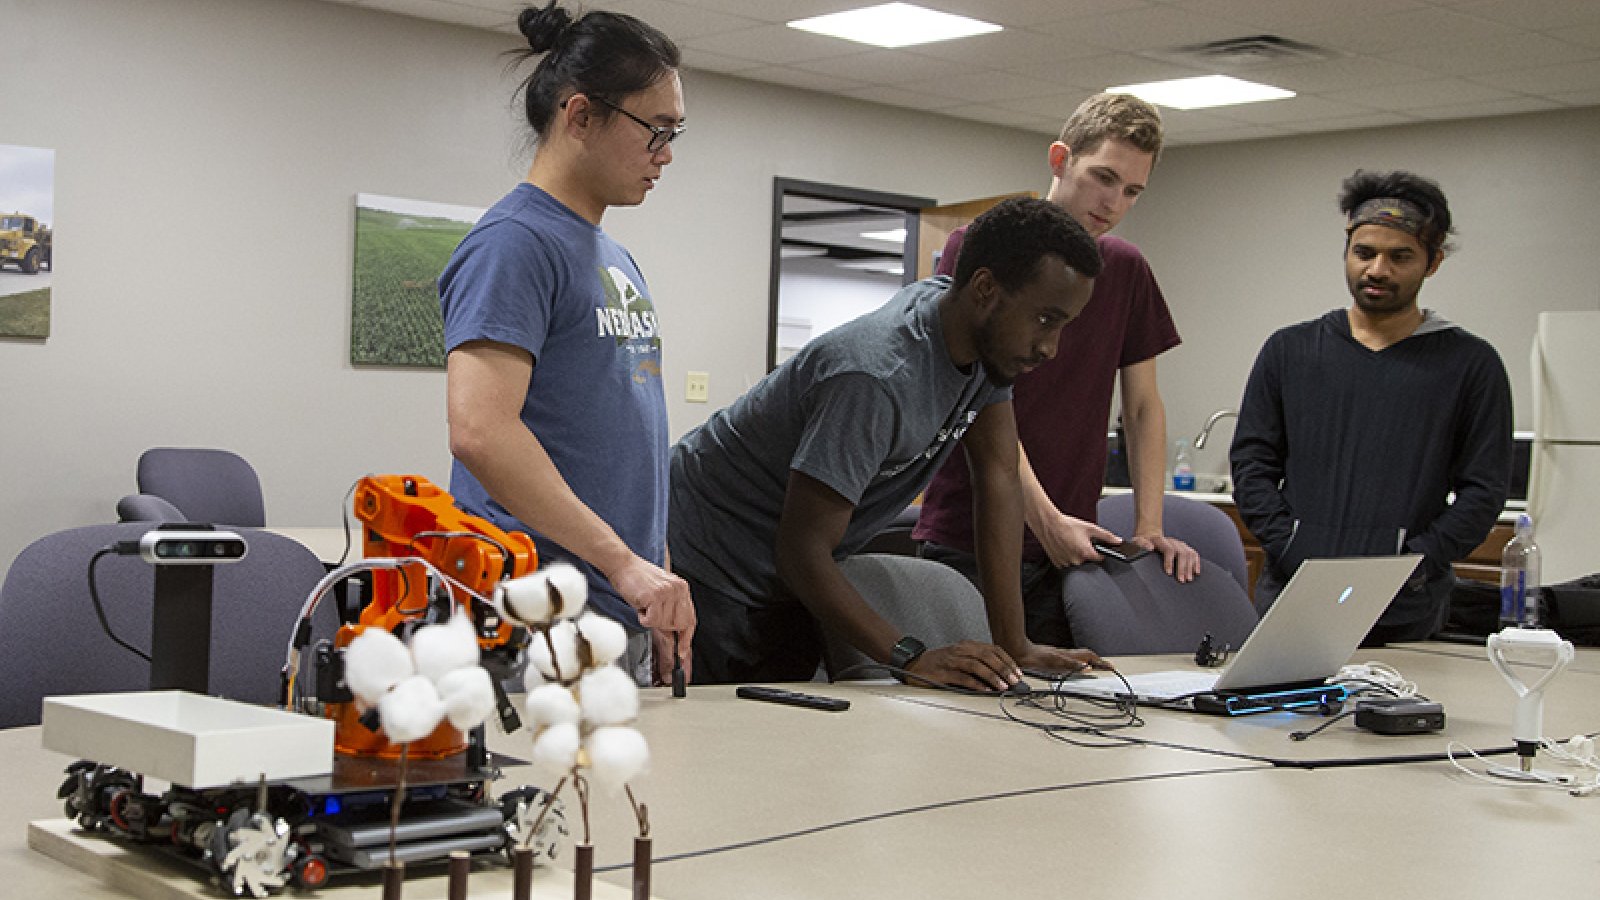 A team of Nebraska Engineering students took first place at the ASABE Robotics Student Design Competition.